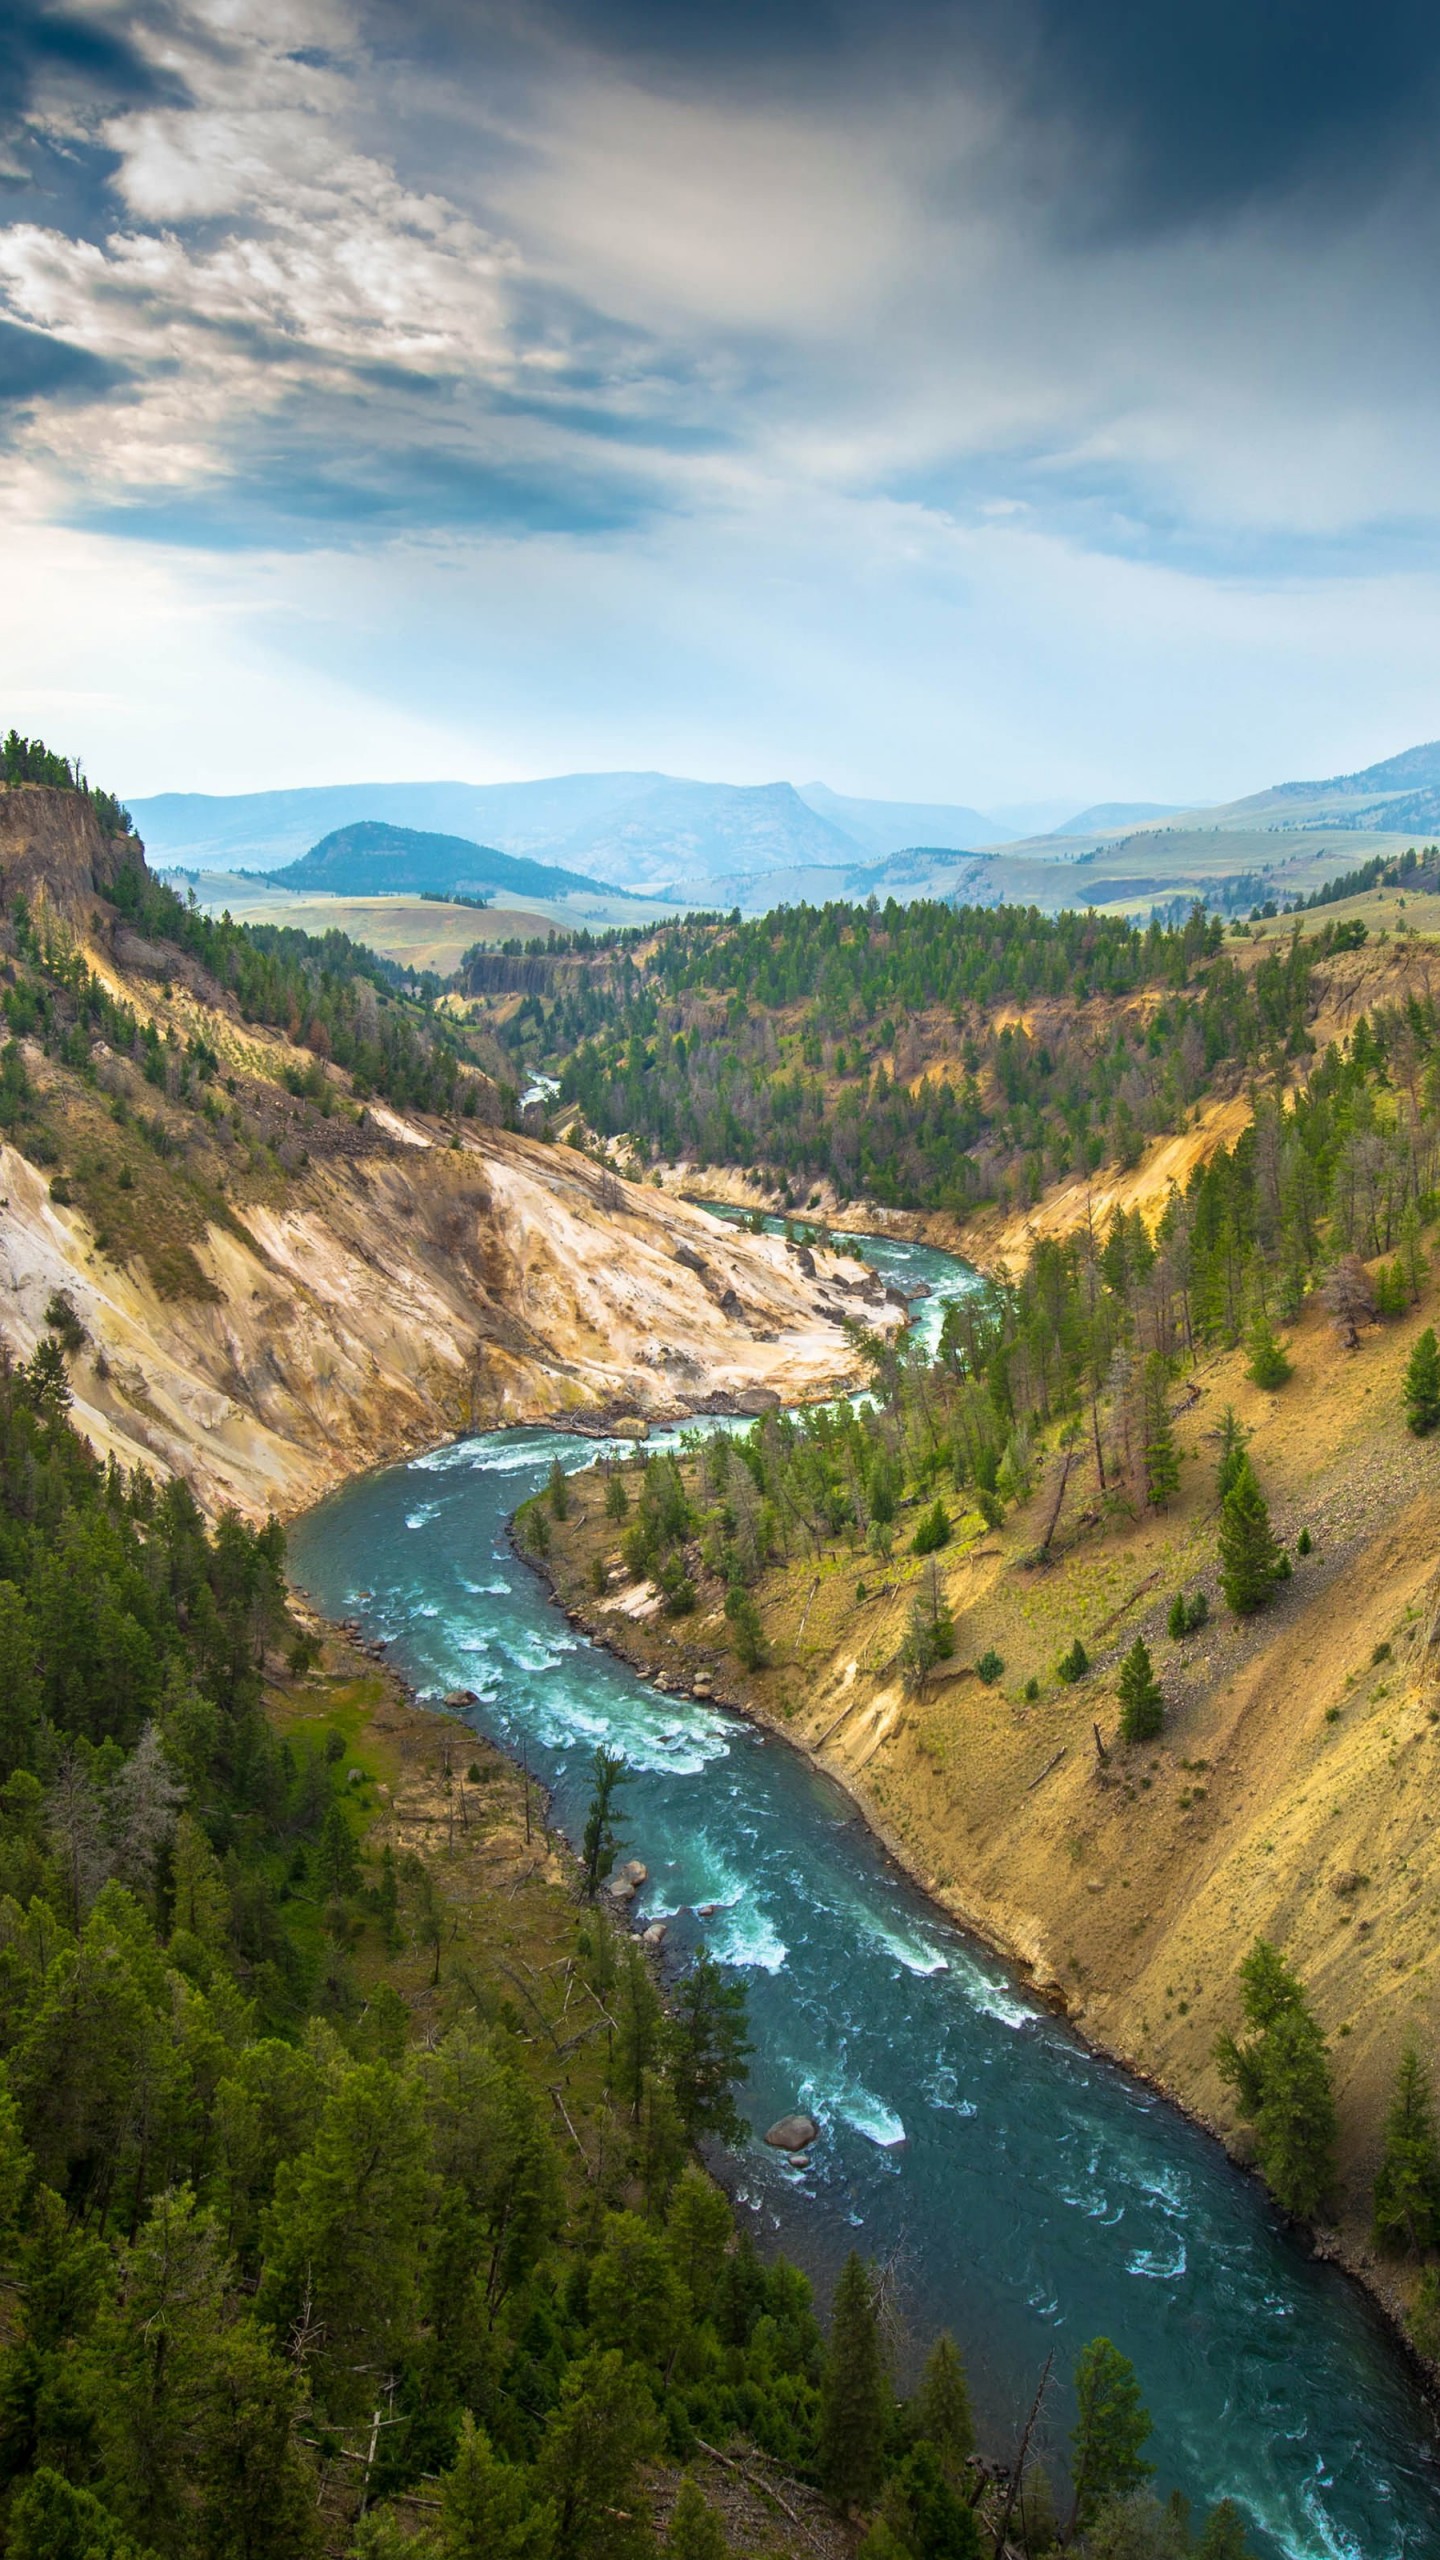 The River, Grand Canyon of Yellowstone National Park, USA Wallpaper for SAMSUNG Galaxy Note 4